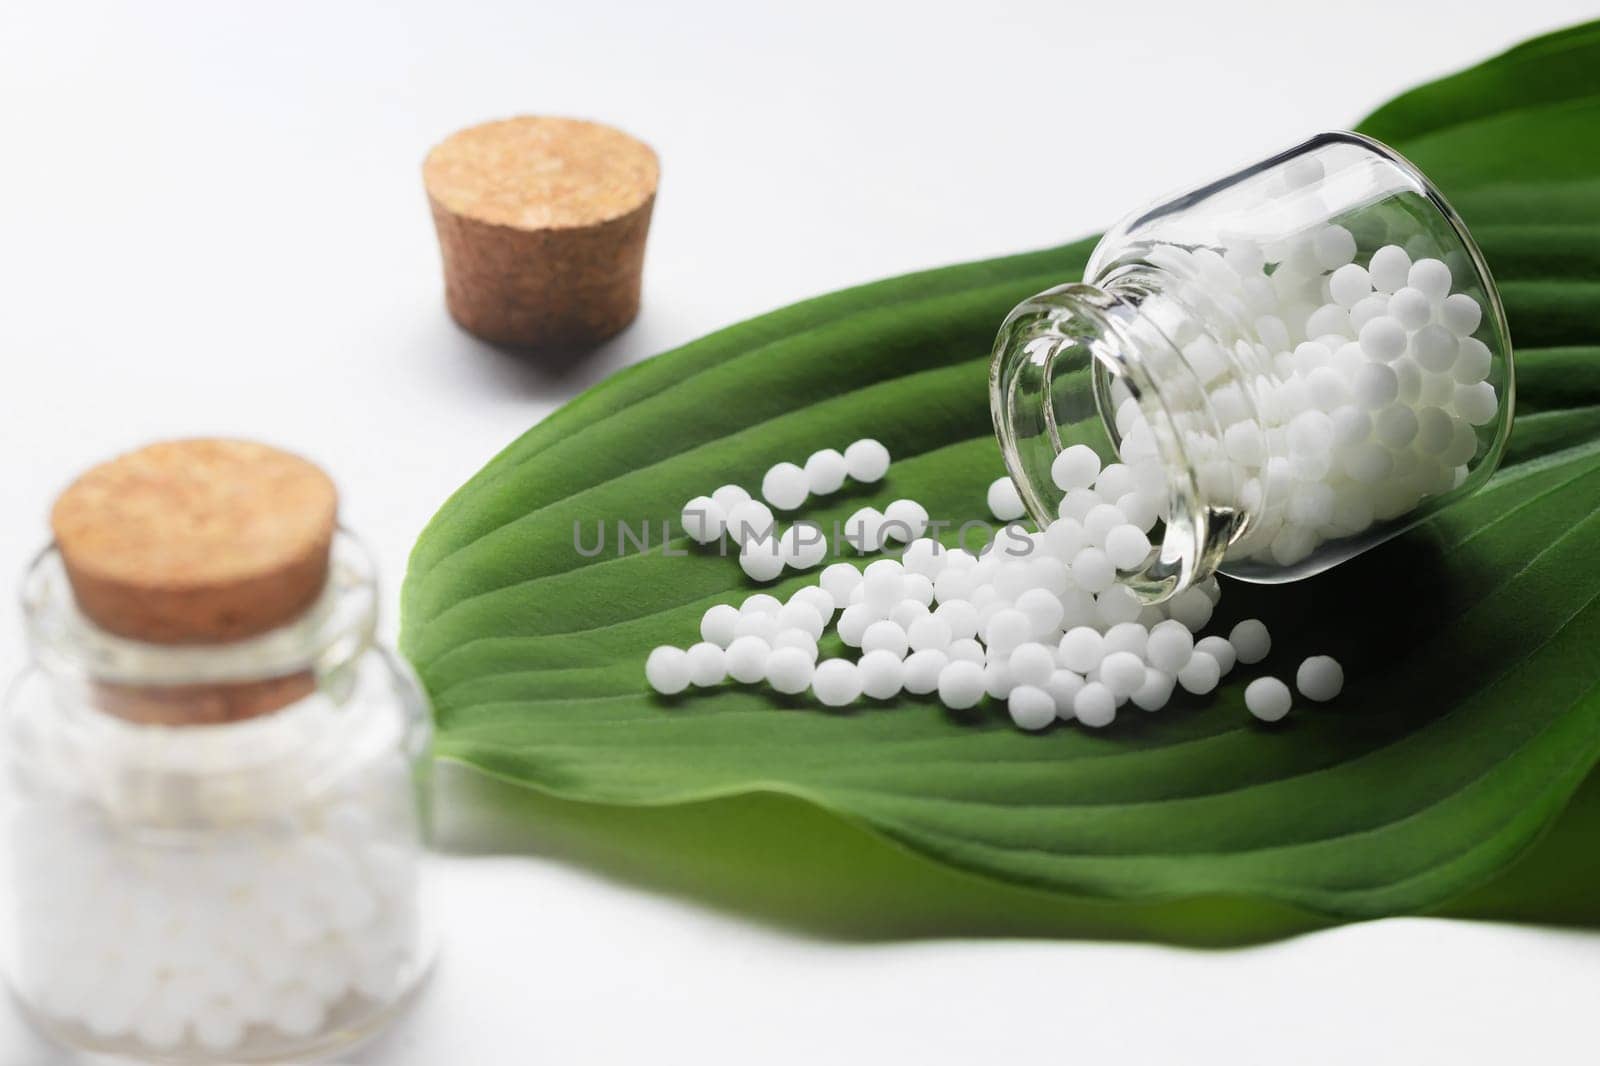 Homeopathic pills scattered from a bottle on a green leaf.